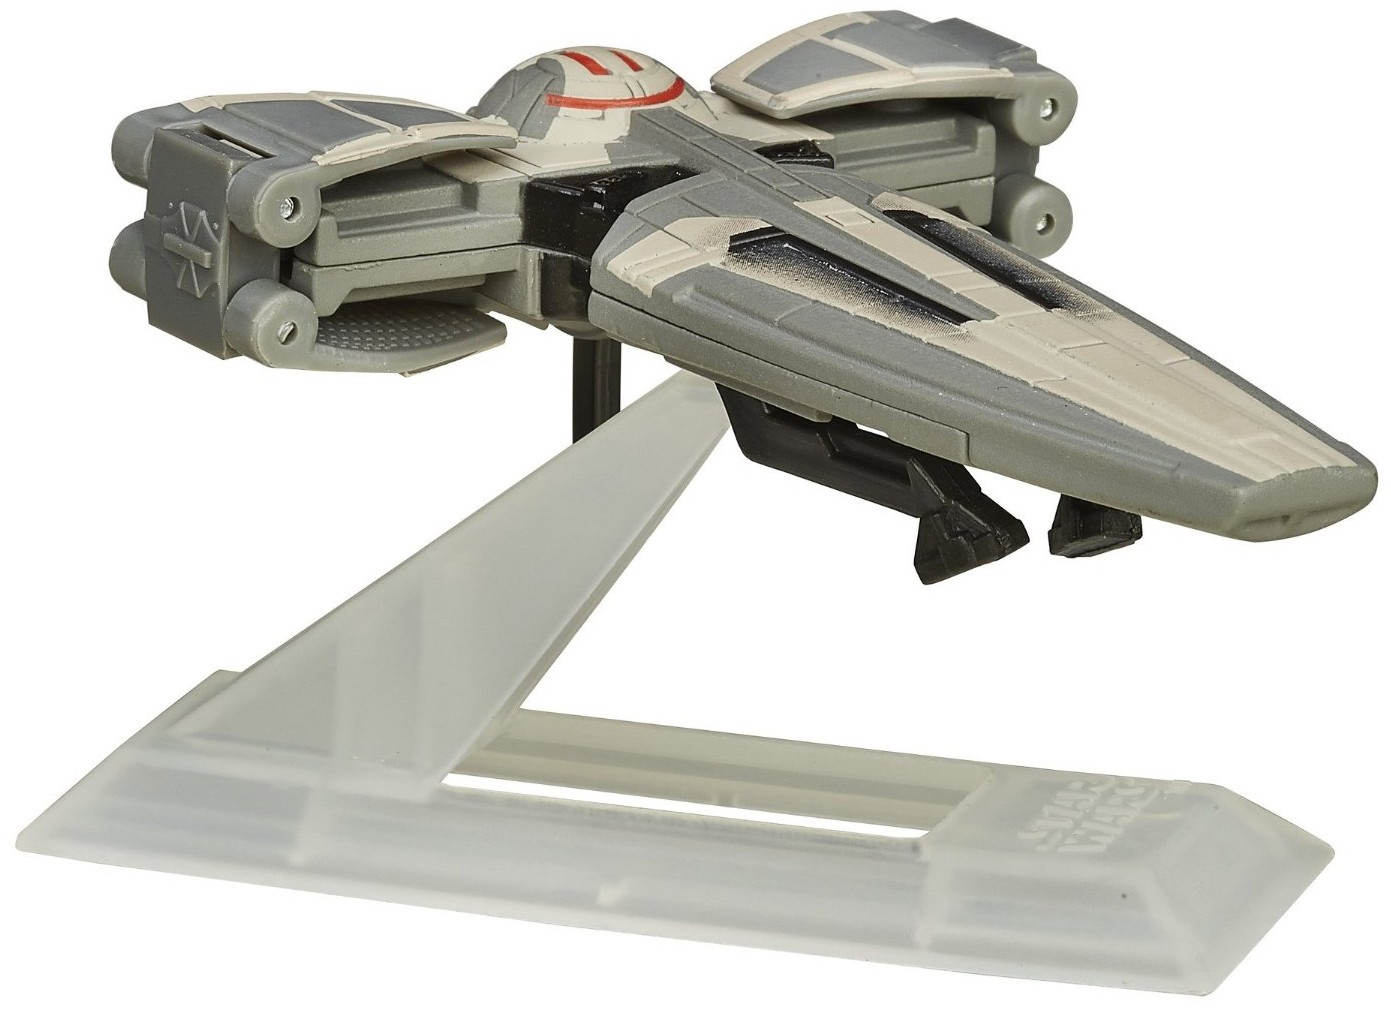 The Sith Infiltrator Titanium Series vehicle toy 2